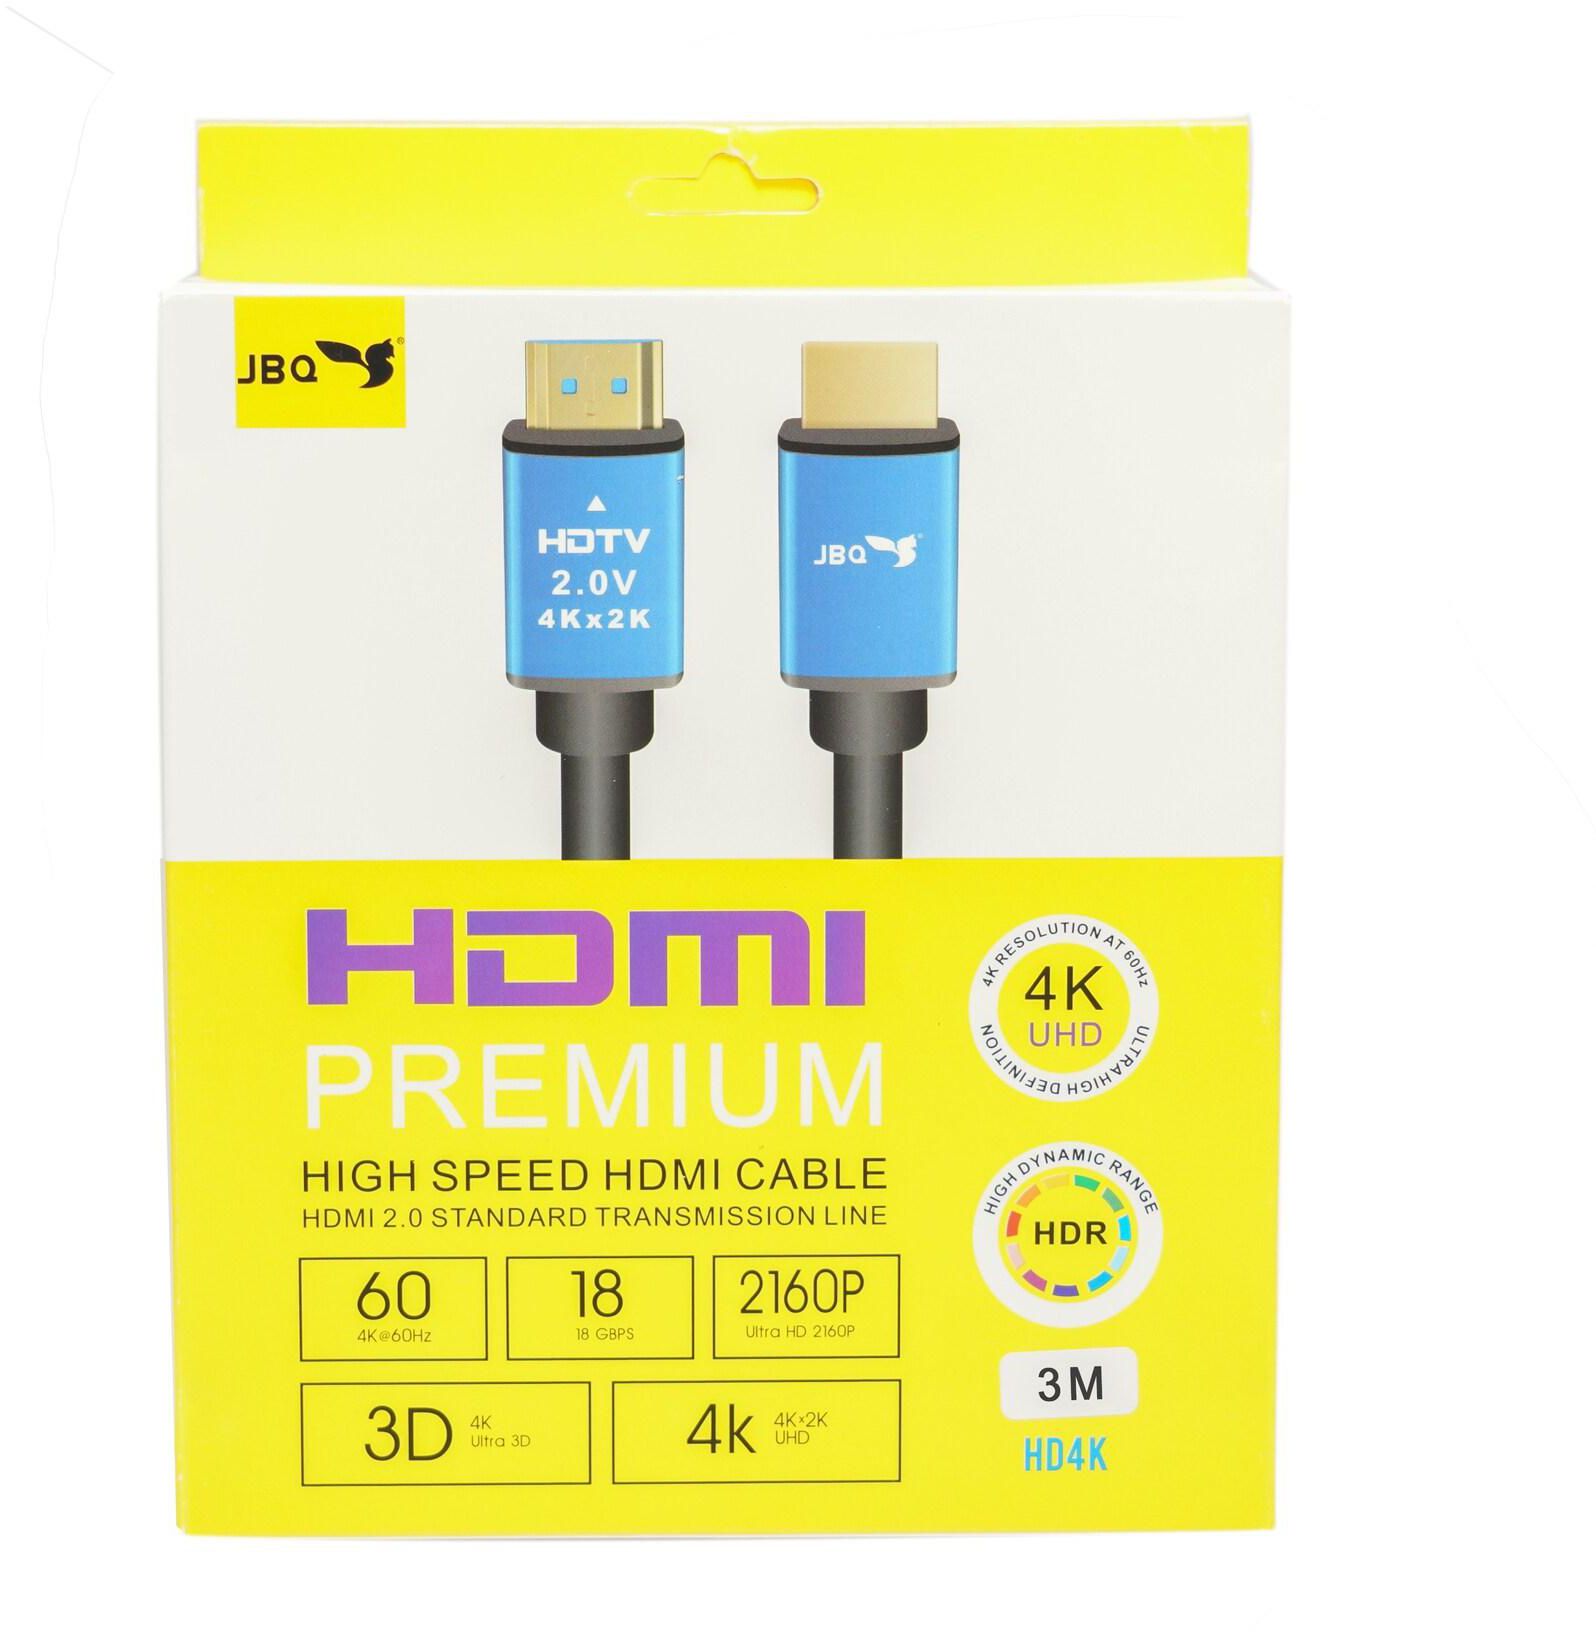 JBQ HDMI Cable 3 Mtr Premium High-Speed HDMI to HDMI Video wire 4K@60Hz Ultra HD 3D 4kUHD HDR 2160P HDMI premium high speed HDMI Cord Braided Compatible for PS4/XBOX GAME ON BOARD BOX/LAPTOP/COMPUTER